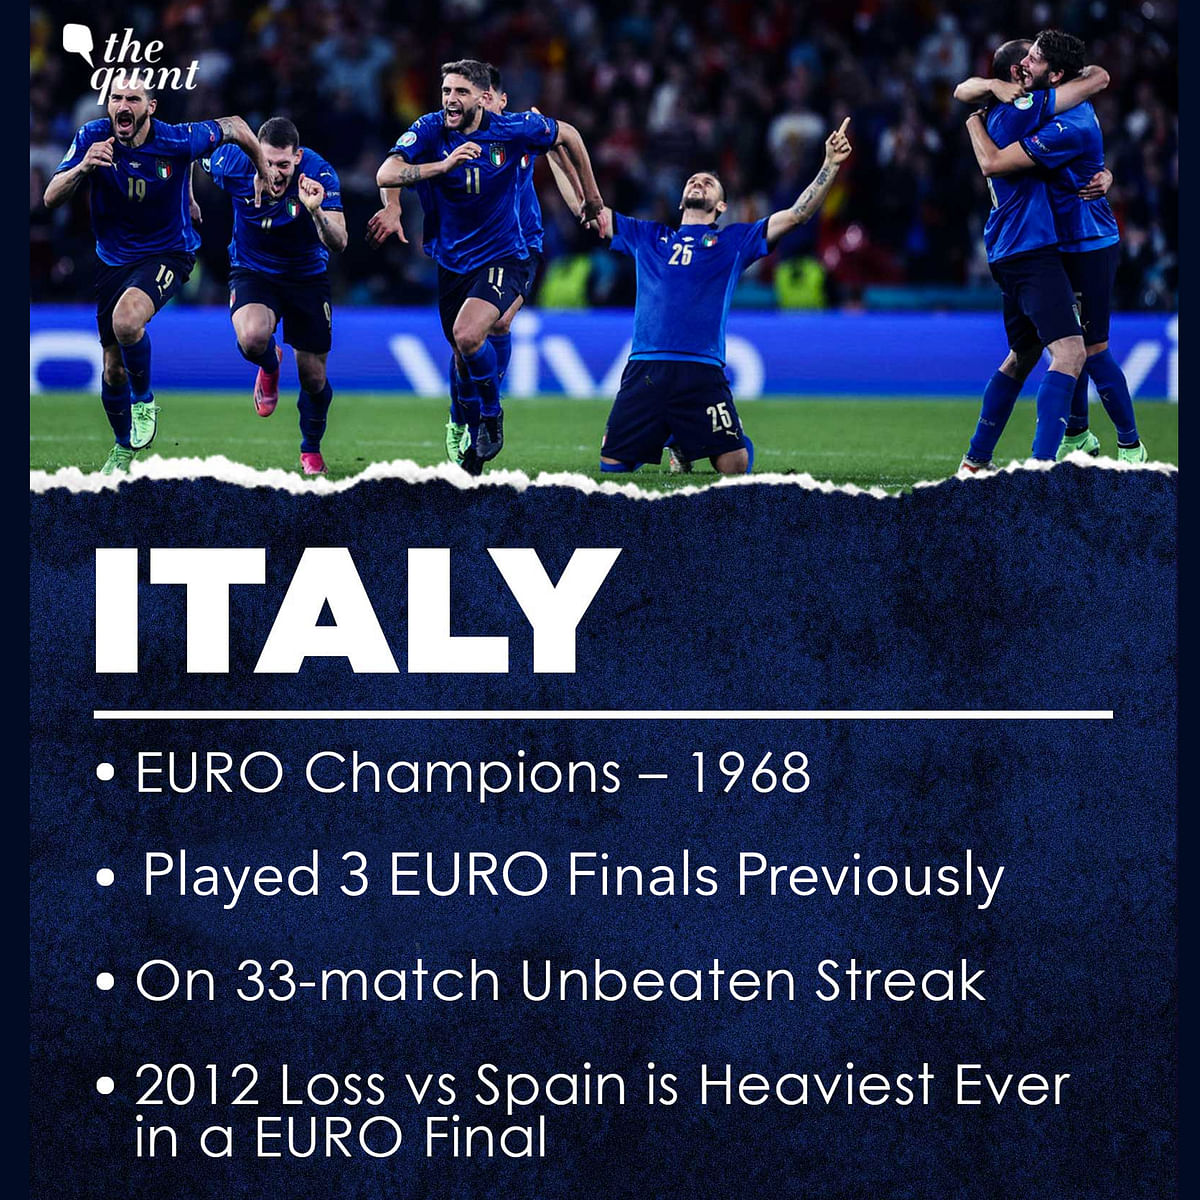 Italy have not lost in 33 consecutive games, while England have kept 10 clean sheets in a 12-match unbeaten streak. 